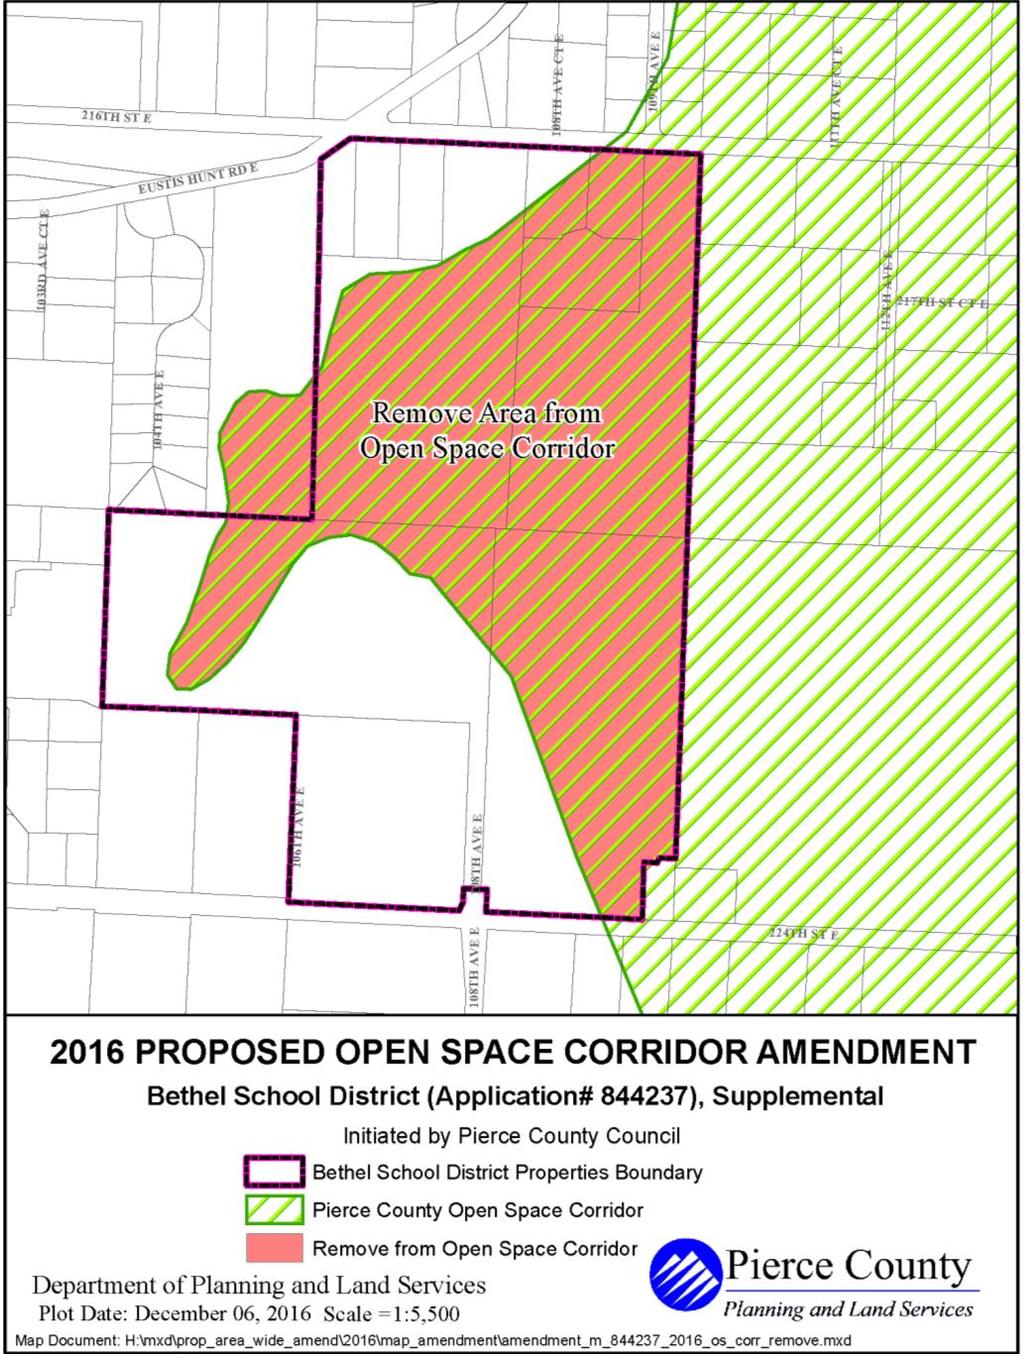 Open Space Corridor Amendment Amend the boundary of the Open Space